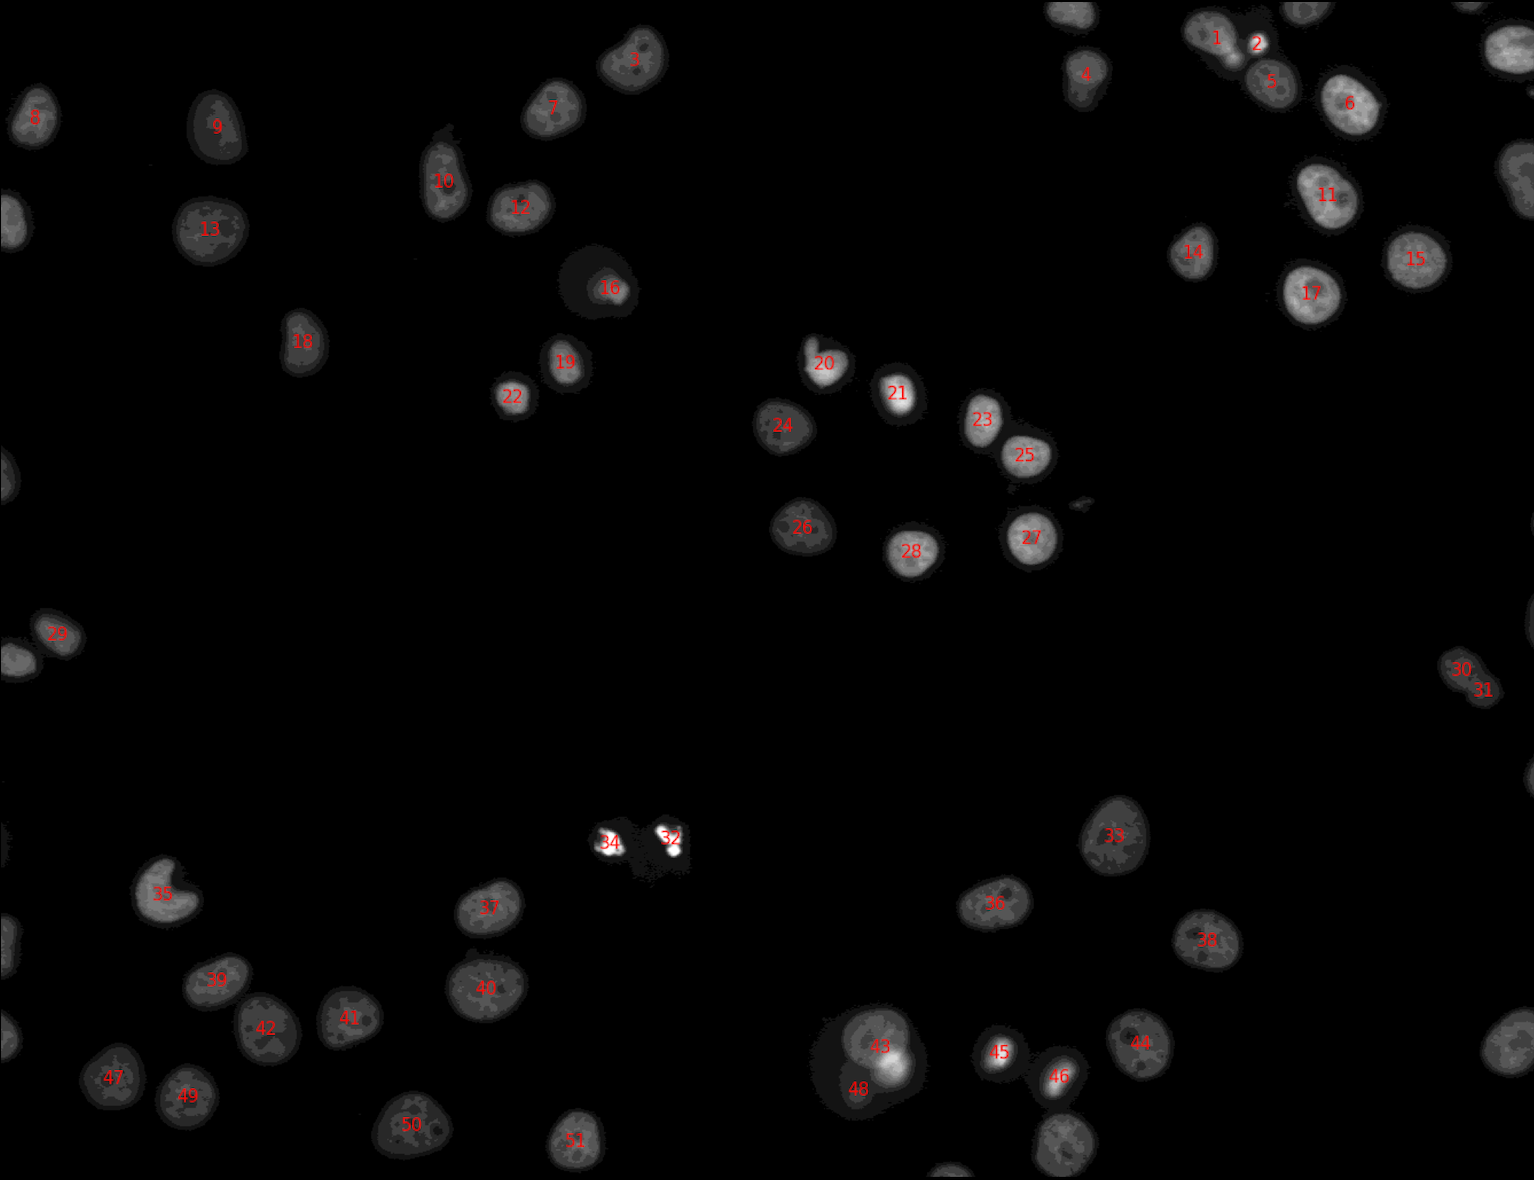 a photo of cells in black and white, several cells have red numbers written atop them.